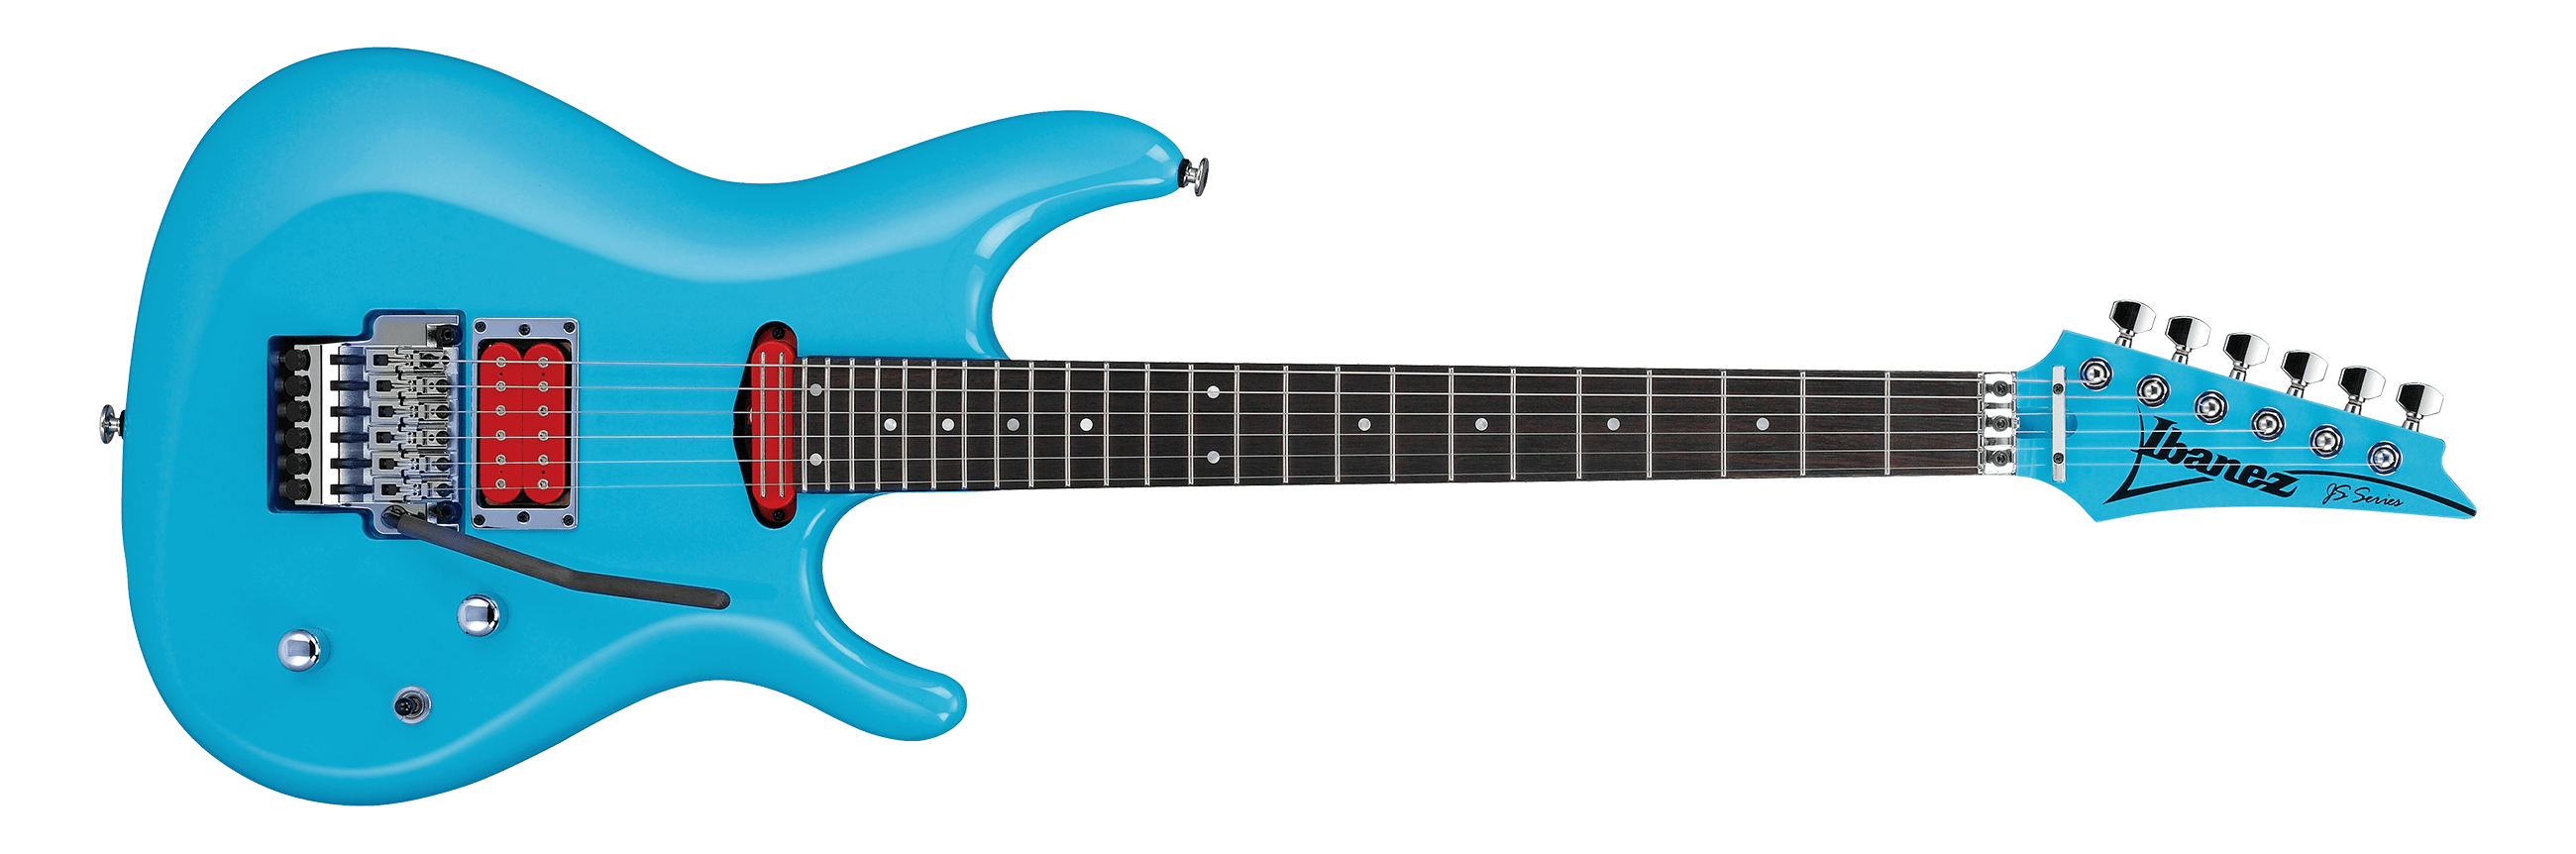 Ibanez JS2410SYB Joe Satriani Signature 6 String Electric Guitar with Case - Sky Blue